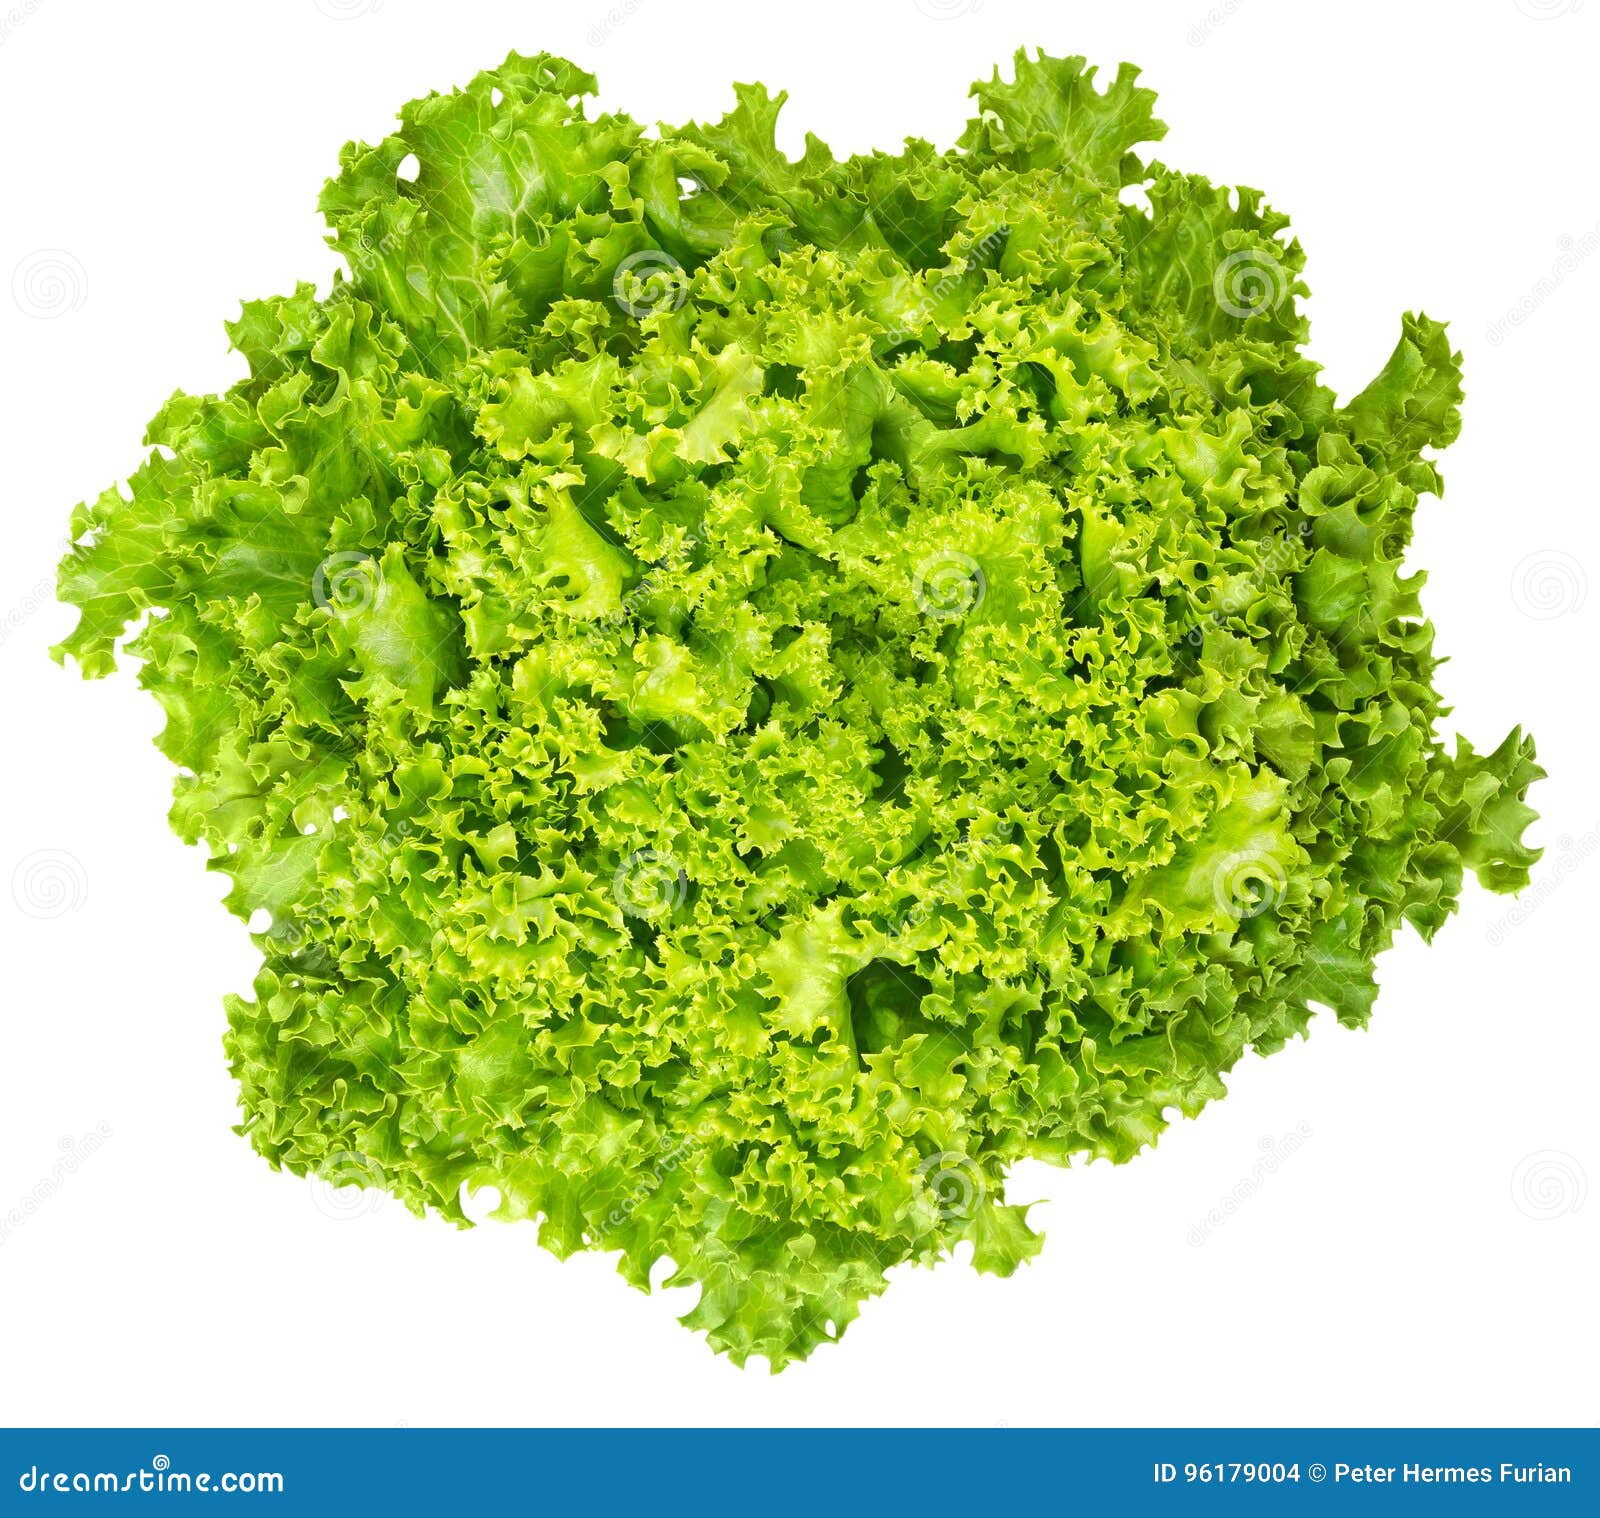 lollo bianco lettuce from above on white background